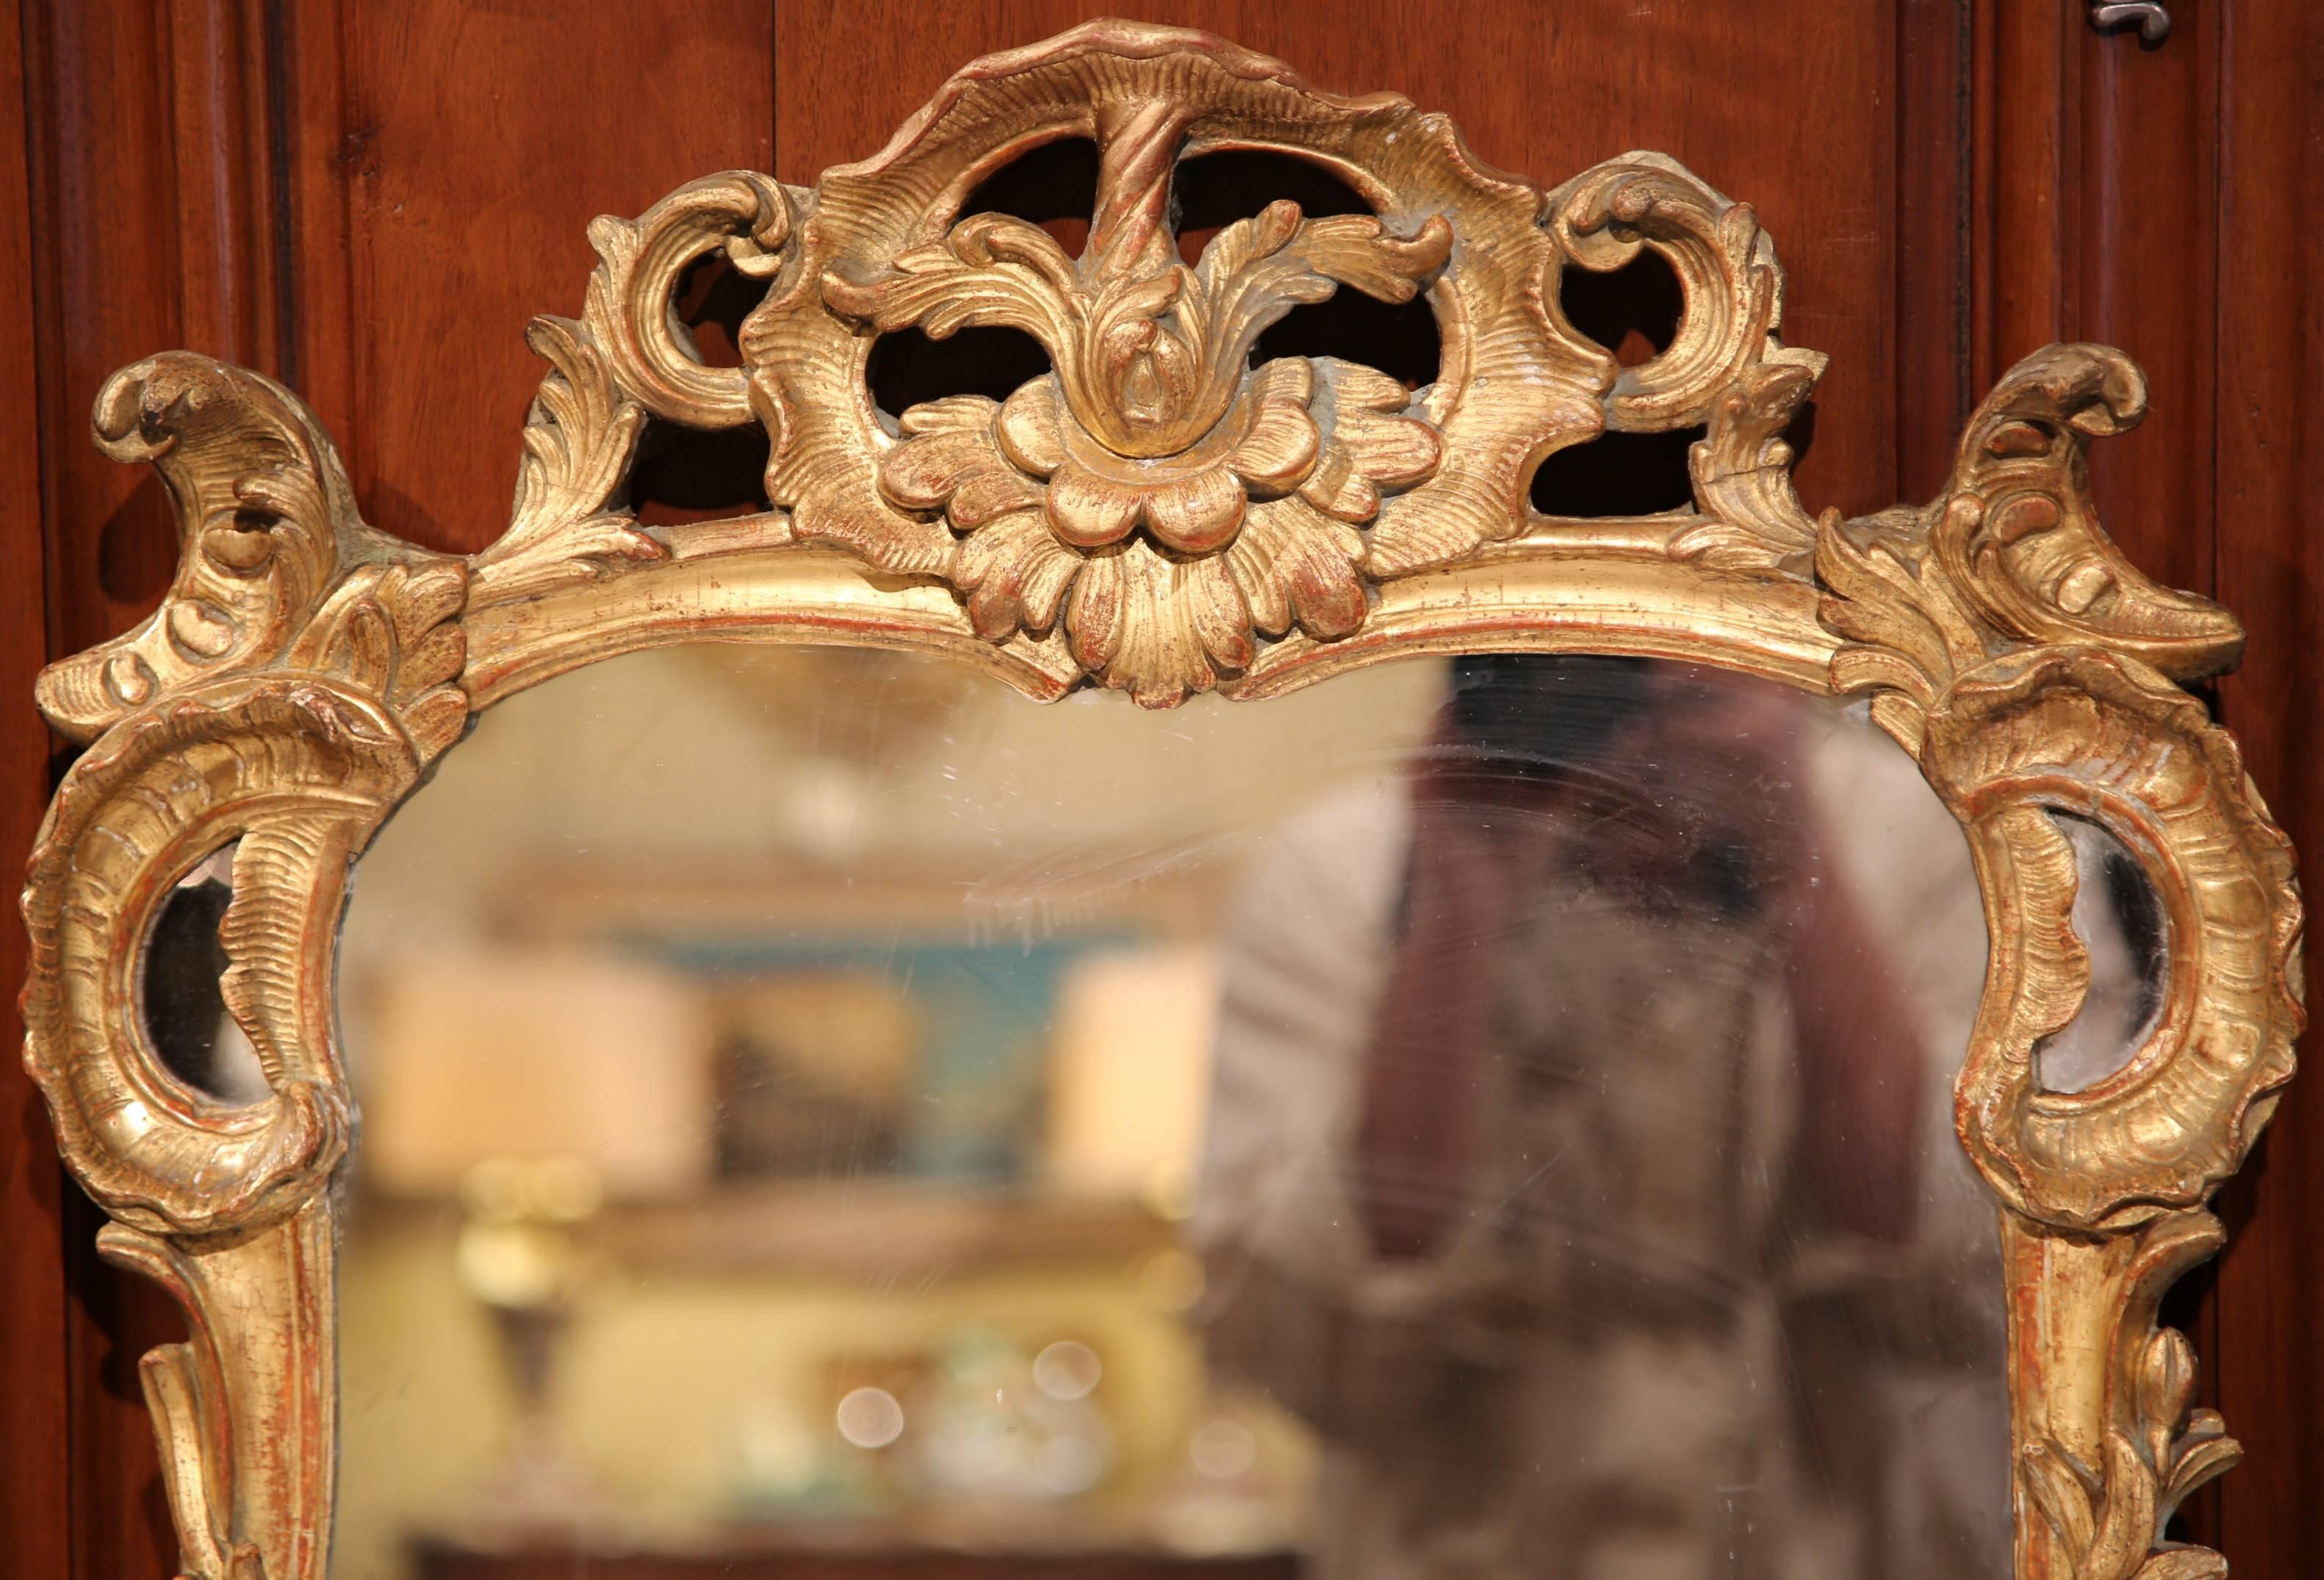 This elegant antique mirror was crafted in Southern France, circa 1780. The rectangular mirror features a nicely carved pediment at the top, has delicate scrolls and flowers and on either side there are carvings that resemble tree branches. The